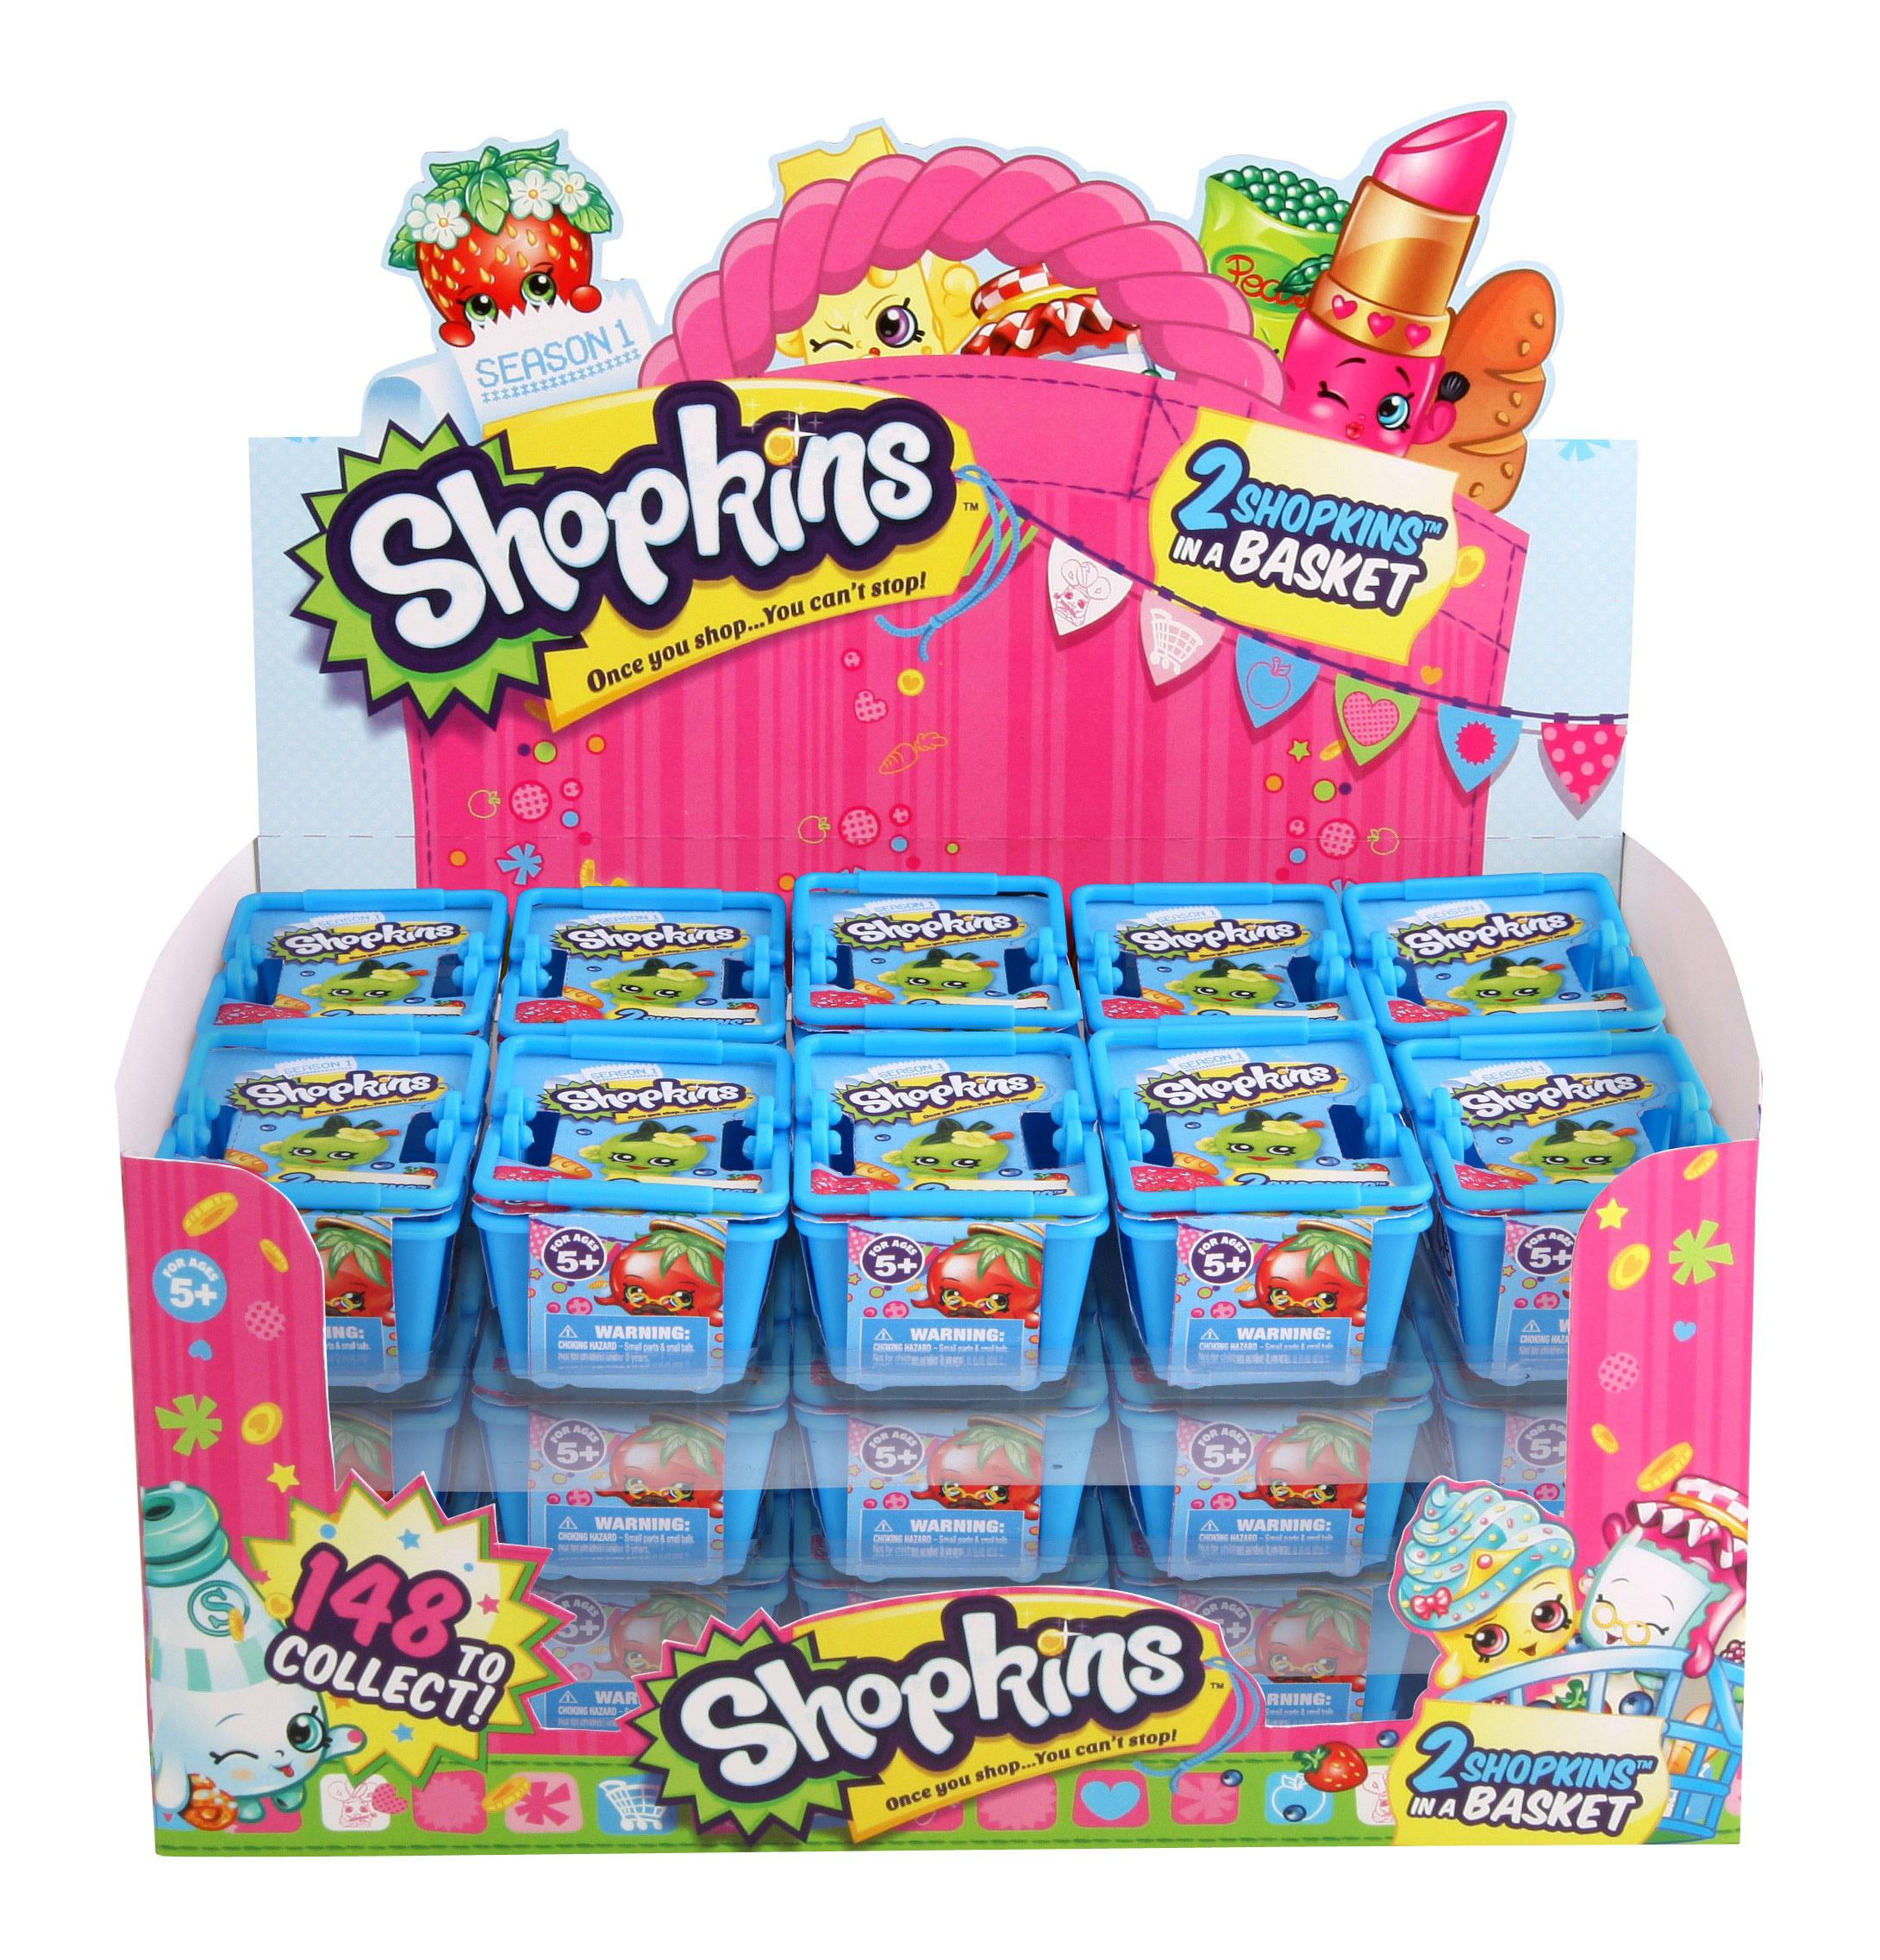 types of shopkins